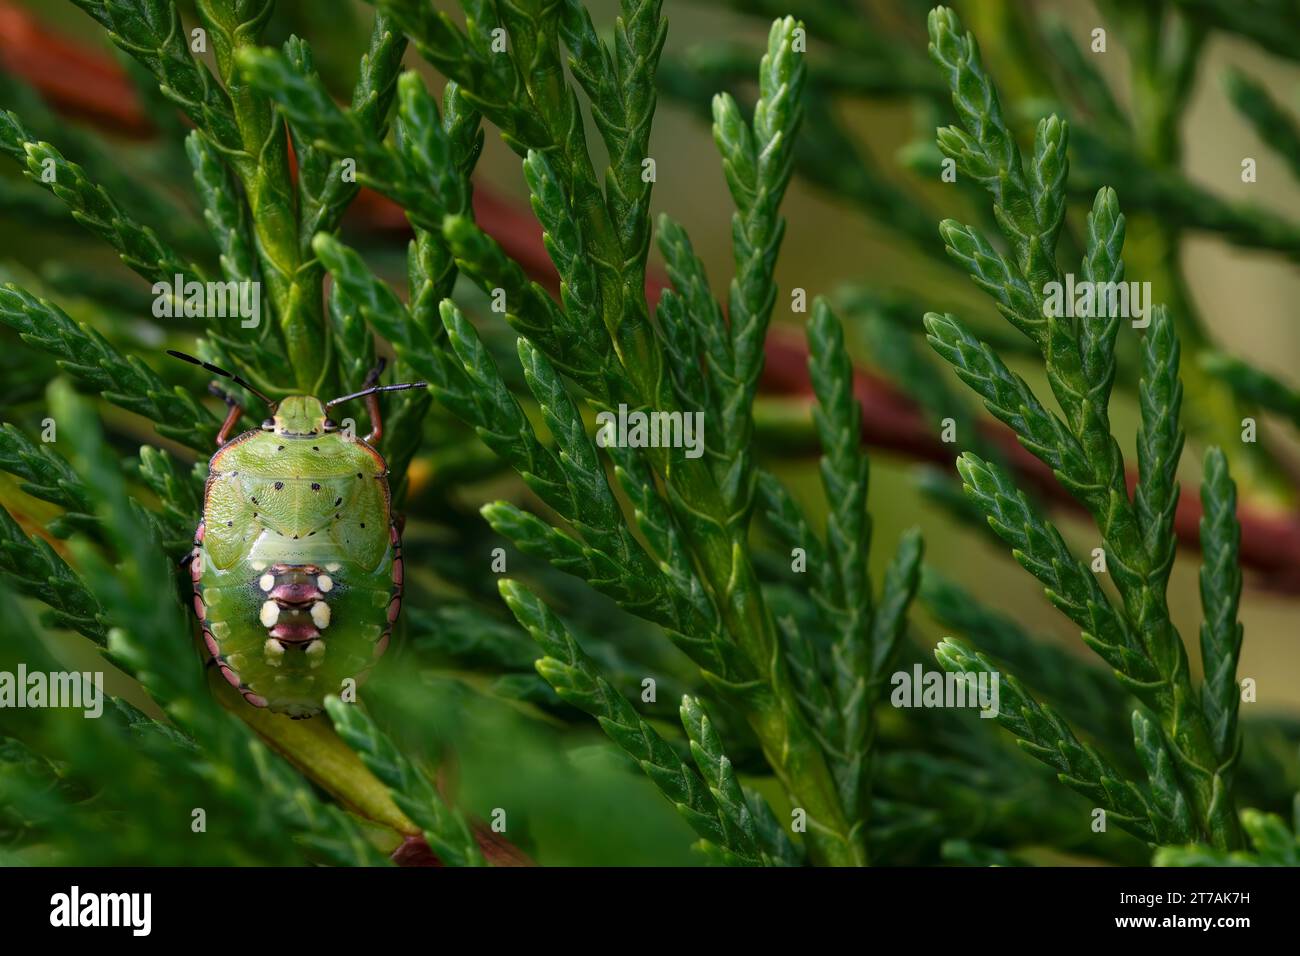 green bedbug with bunting on its back perched on a spruce leaf with green background. macrophotography of fauna. Copy Space. Stock Photo